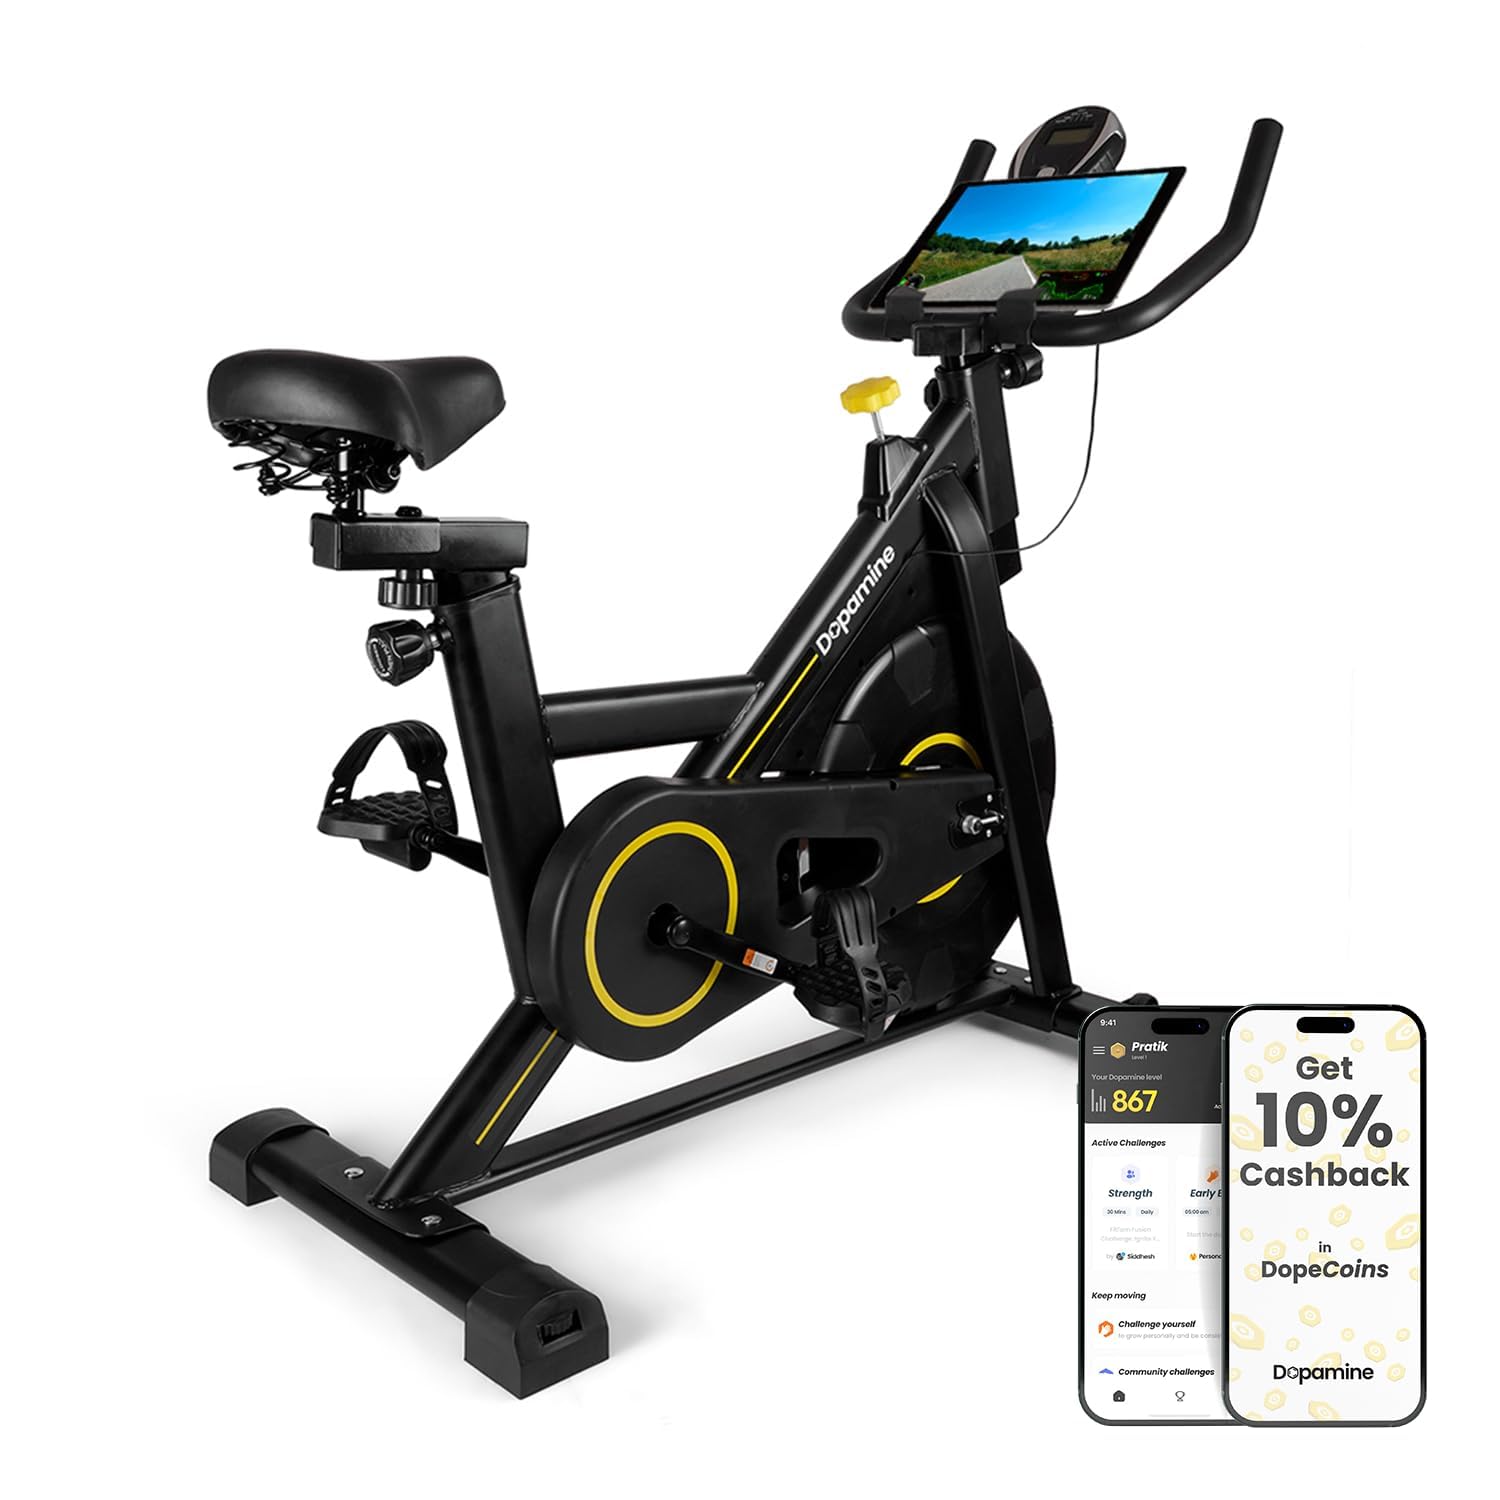 The Cube Club Bluetooth Enabled Exercise Spin Bike with Over 100 Magnetic Resistance Levels